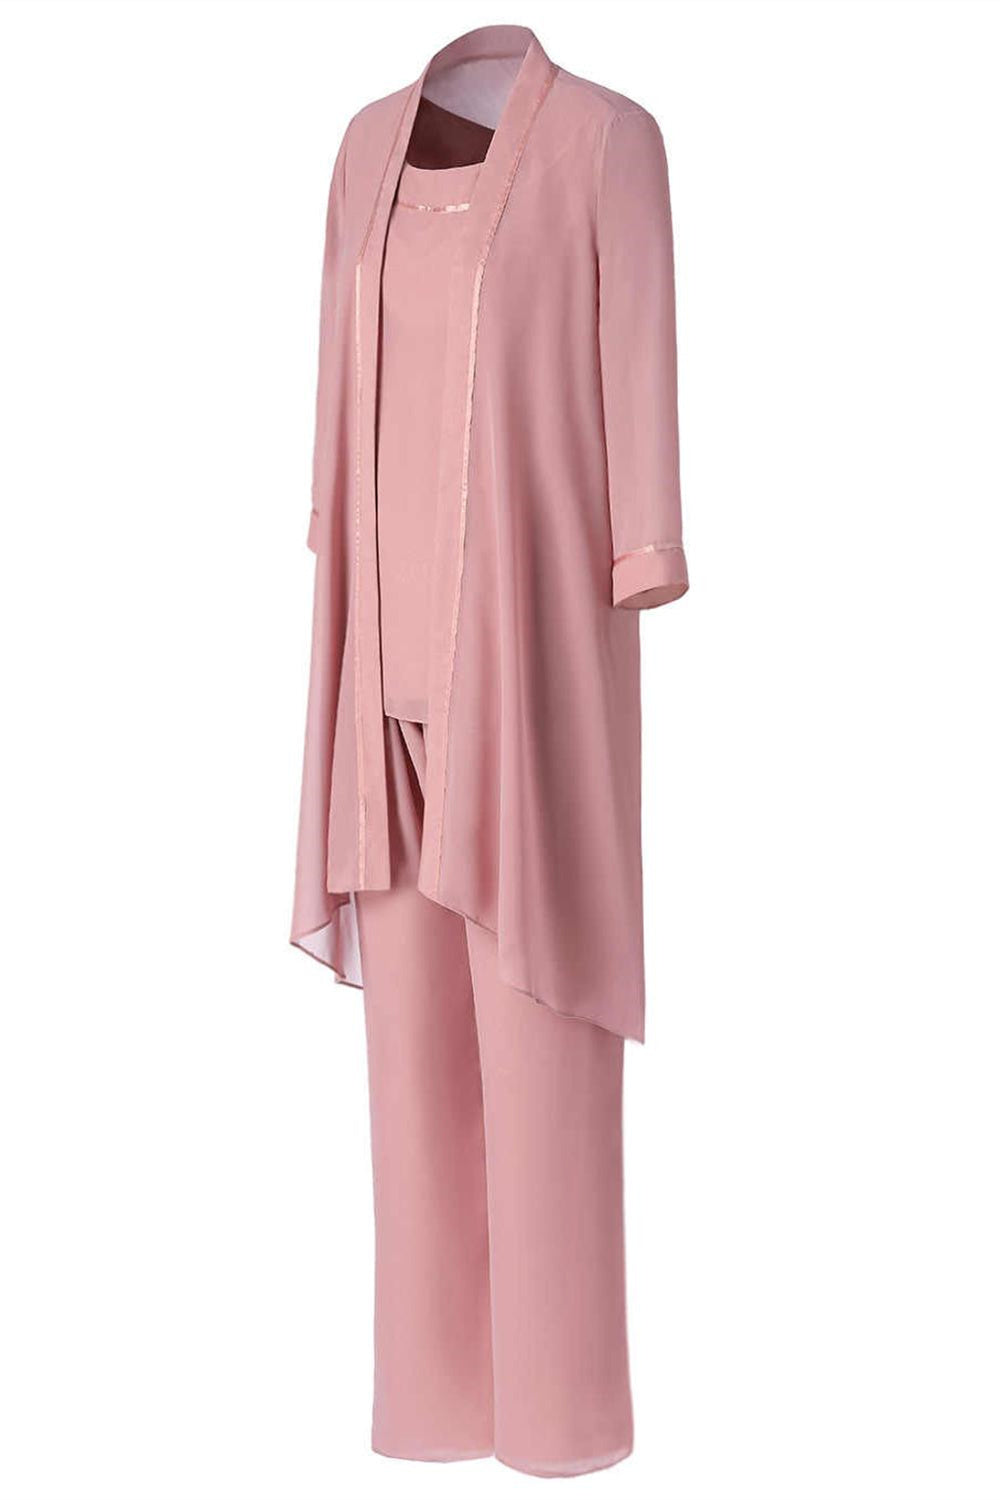 Three-Piece Pink Chiffon Half Sleeve Mother of the Bride Pant